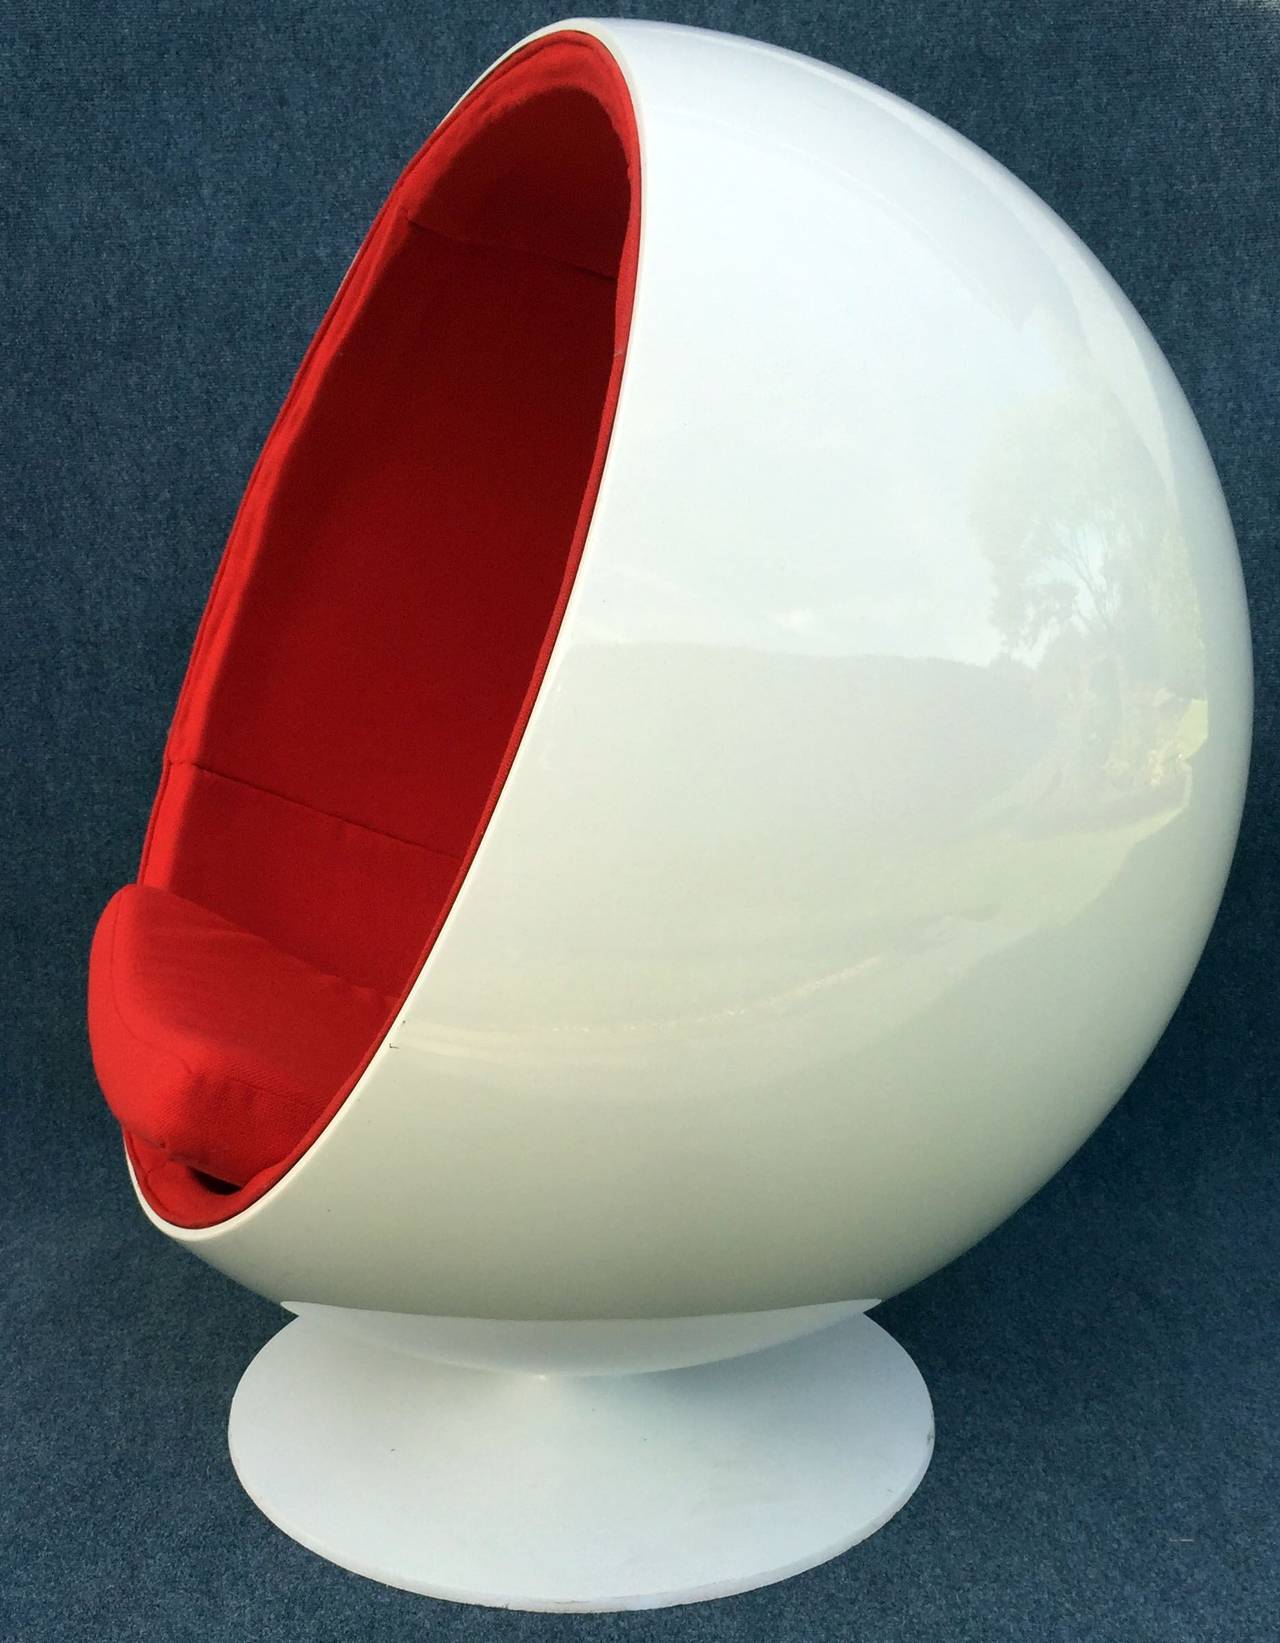 Mid-Century Modern Ball or Globe Chair by Eero Aarnio for Asko